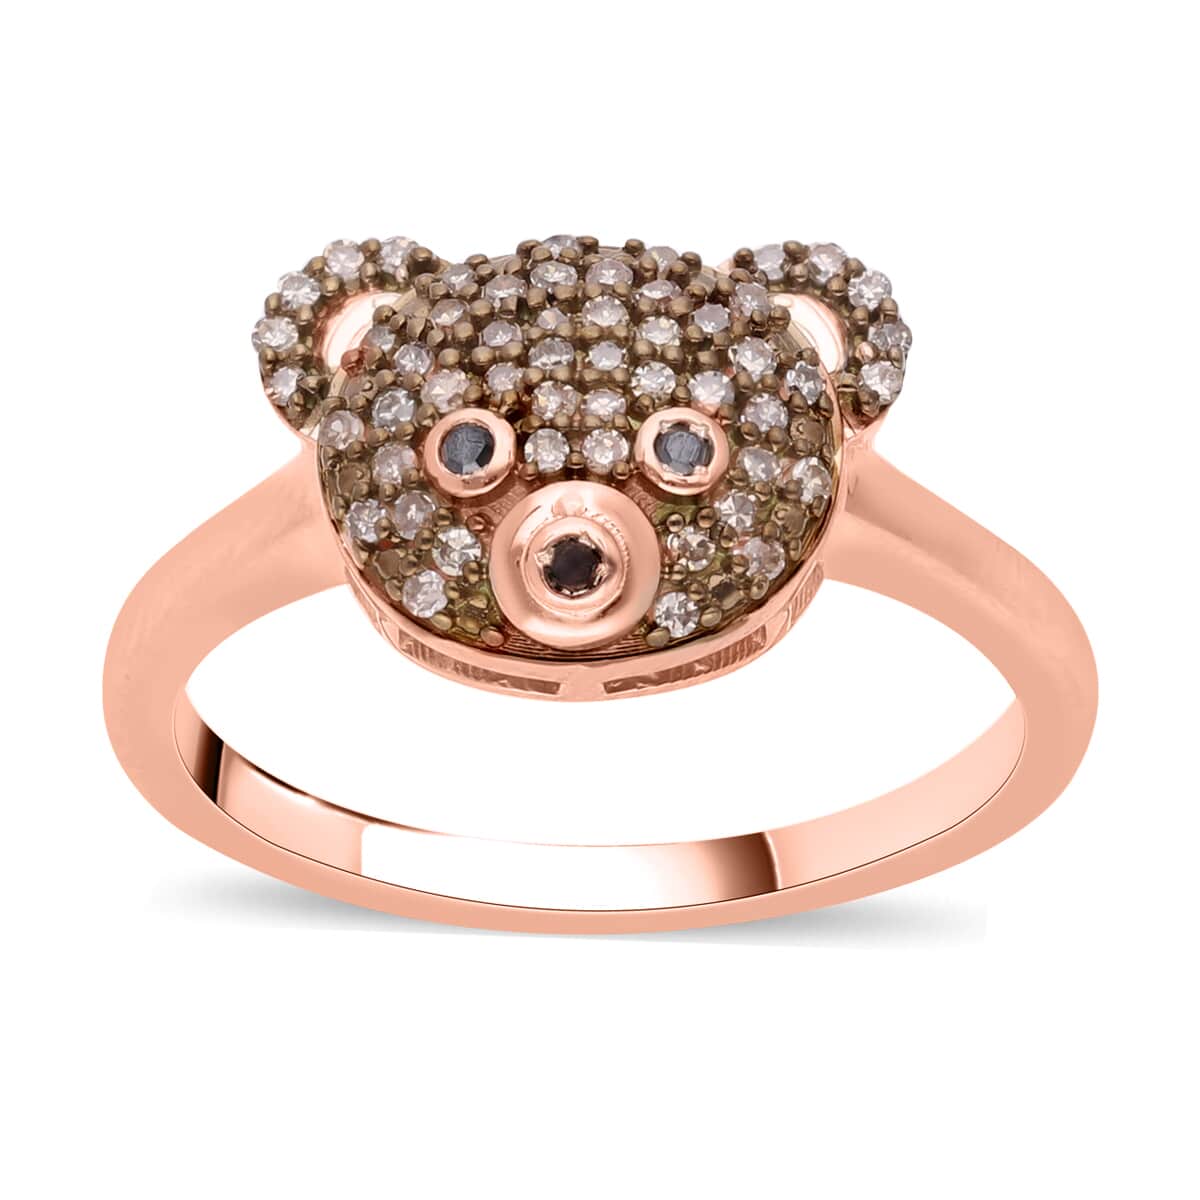 Buy Natural Champagne Diamond and Black Diamond Teddy Bear Ring in Vermeil  Rose Gold Over Sterling Silver (Size 7.0) 0.25 ctw at